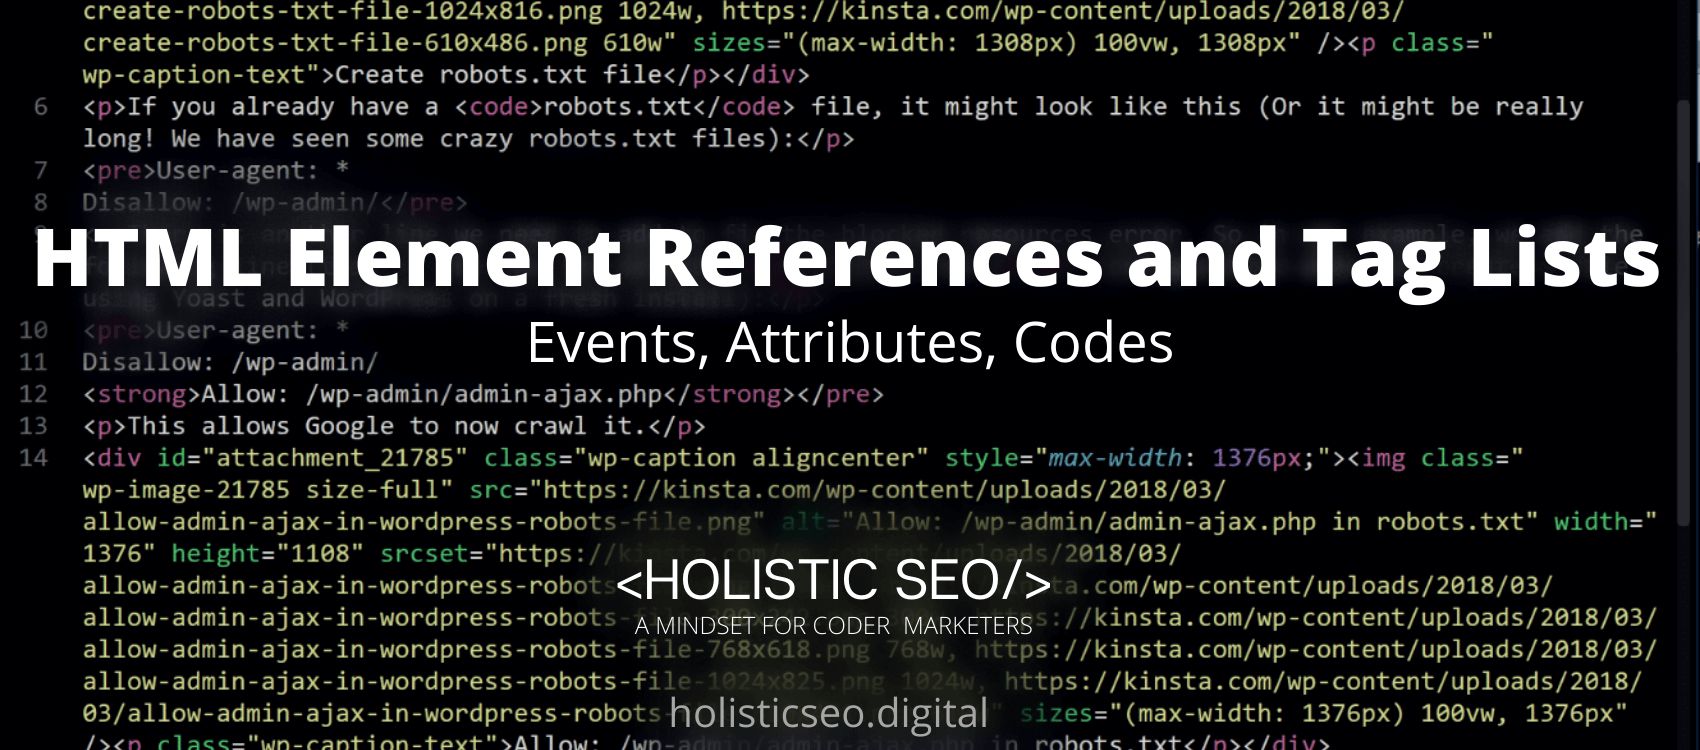 HTML Element References and Tag Lists